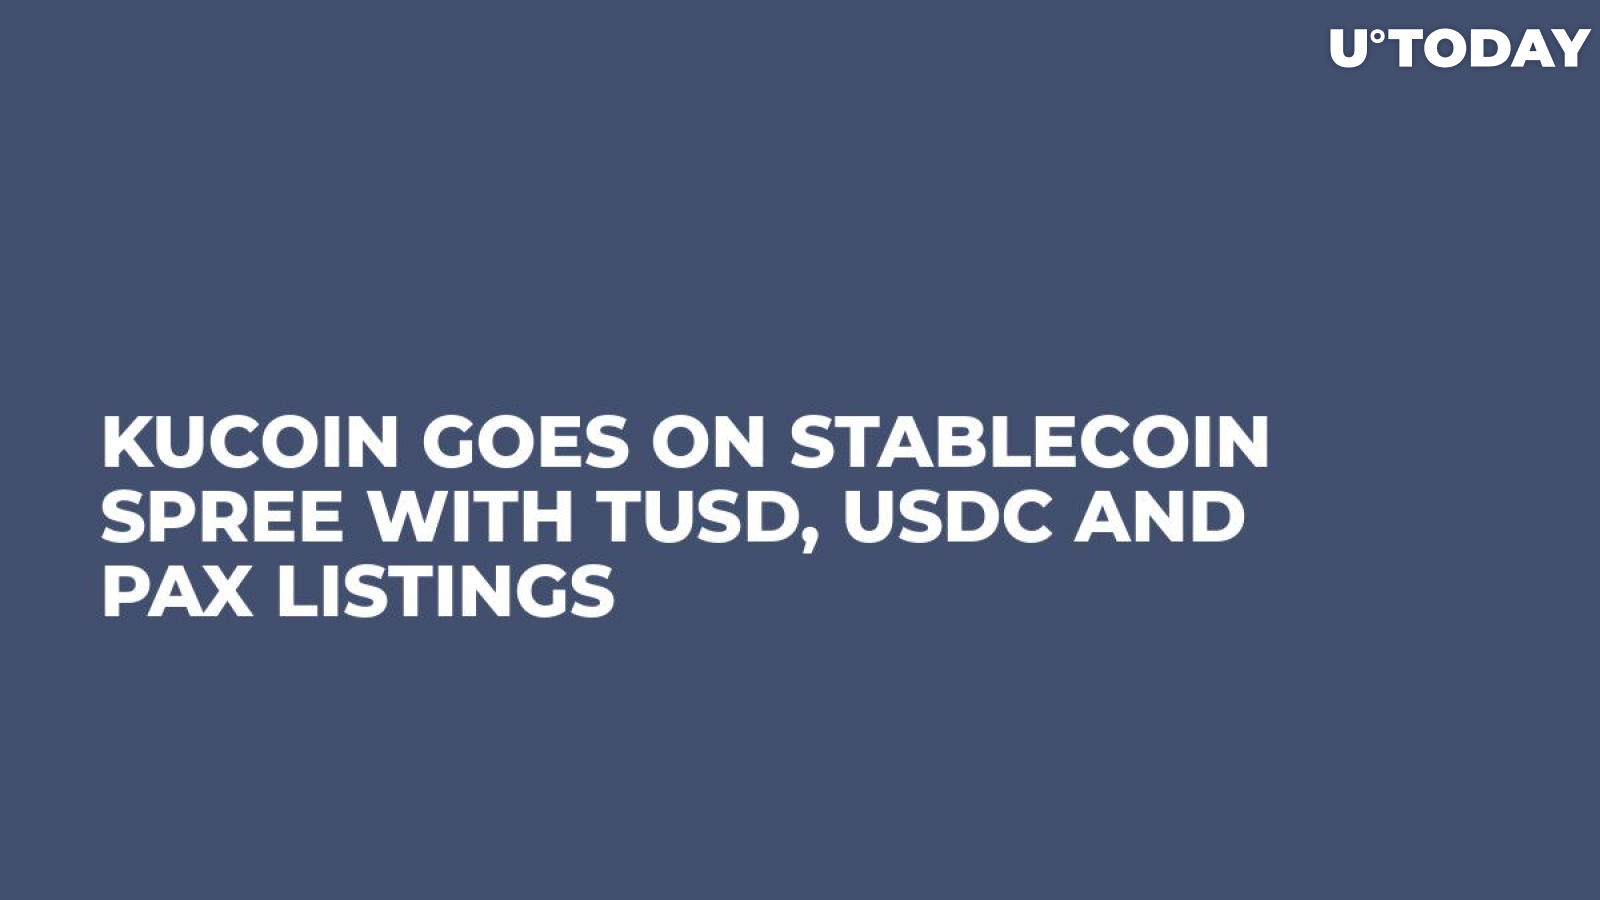 KuCoin Goes on Stablecoin Spree With TUSD, USDC and PAX Listings 